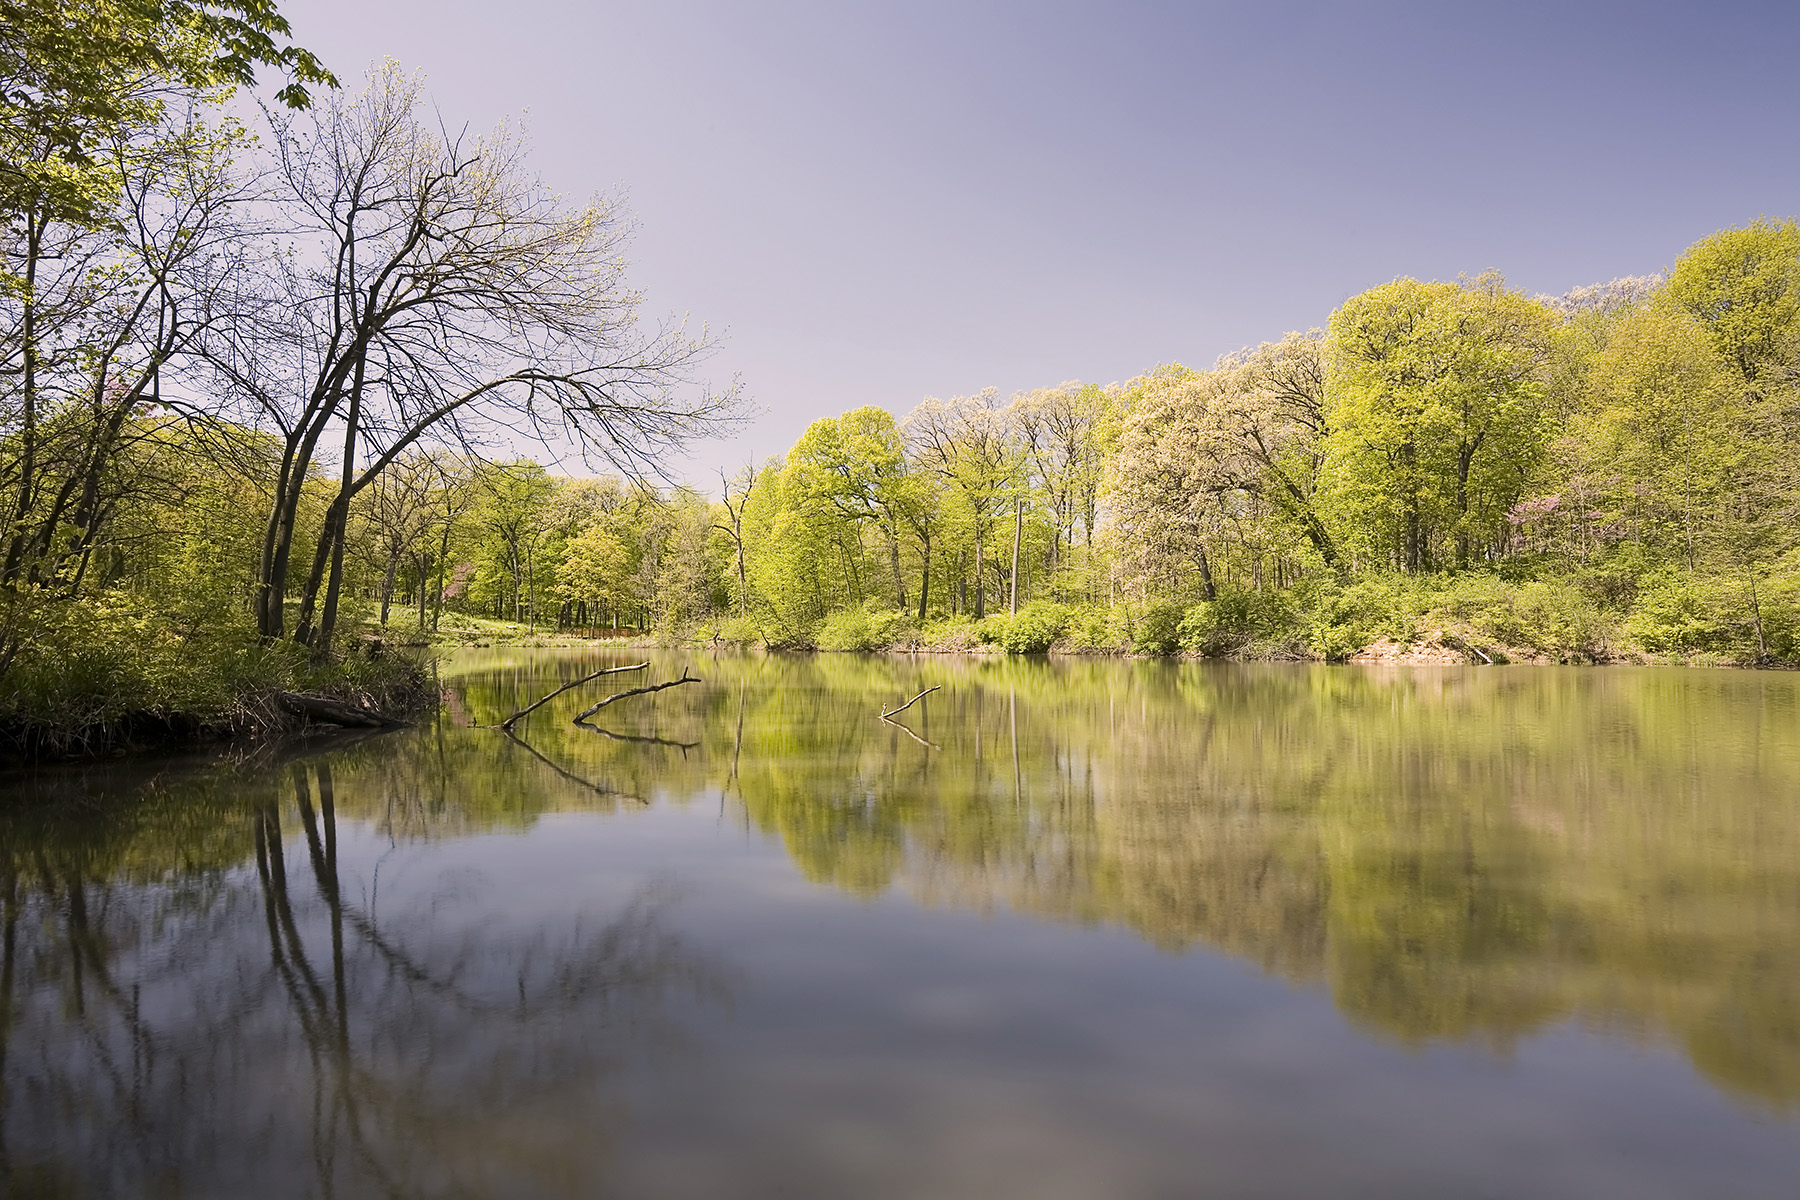 Photo shows a body of water surrounded by trees.